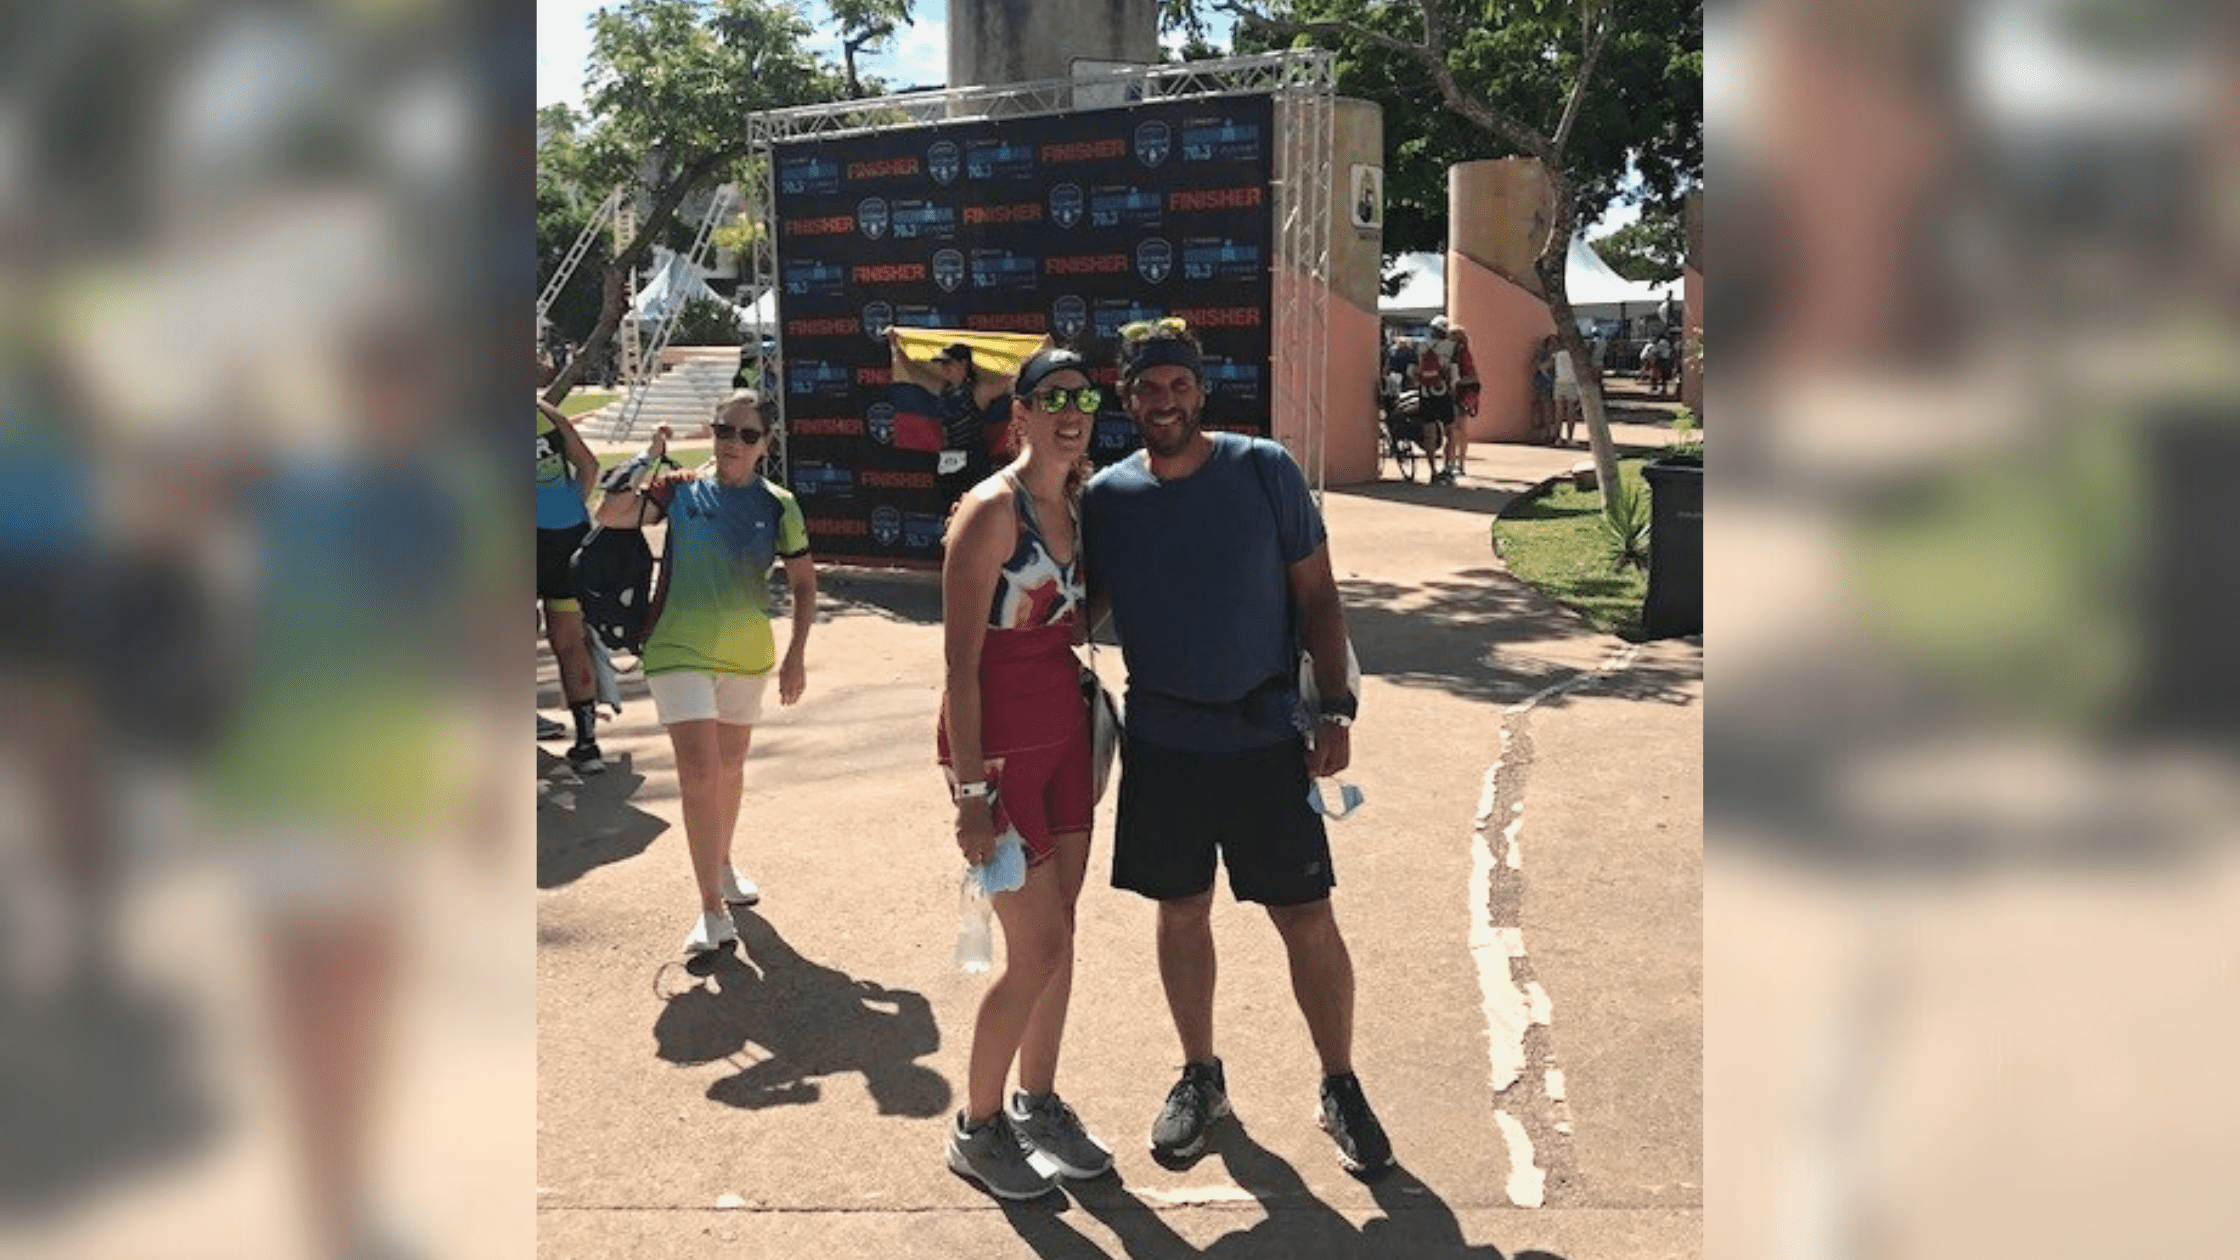 On September 26, 2021, in Cozumel, Mexico, Marissa and I completed the Half Ironman. 